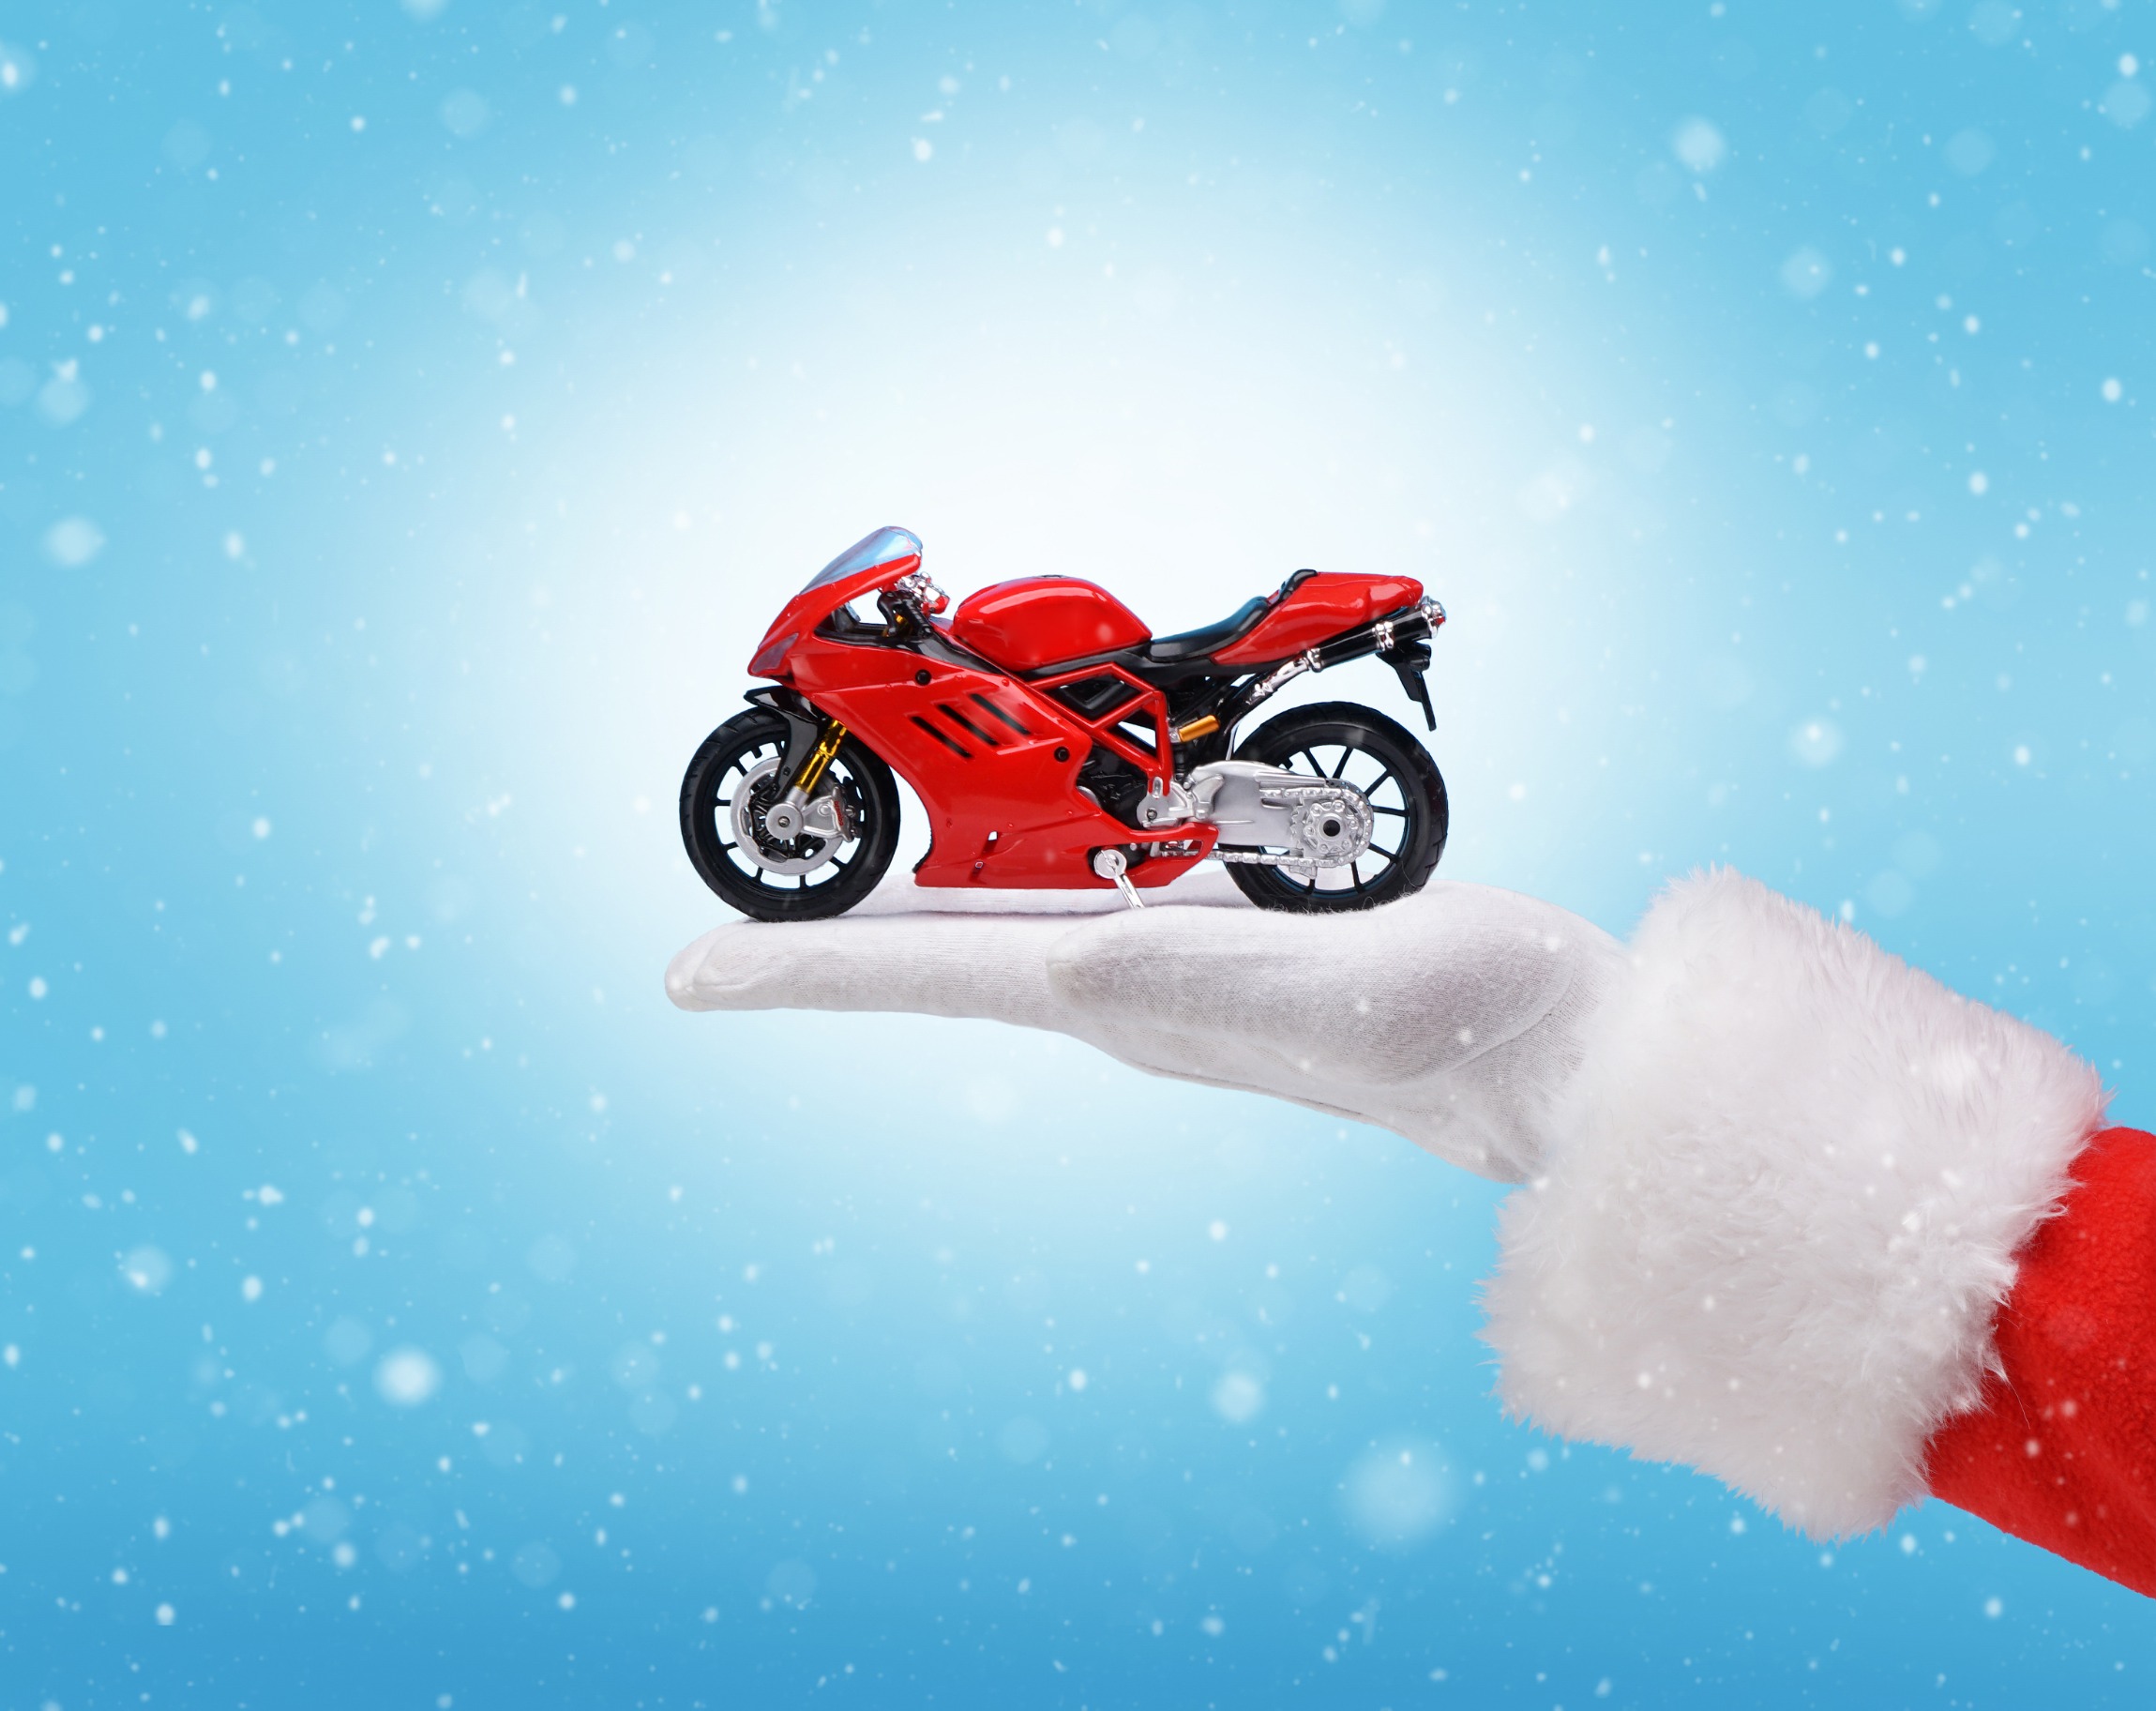 Sell Your Motorcycle for Holiday Cash